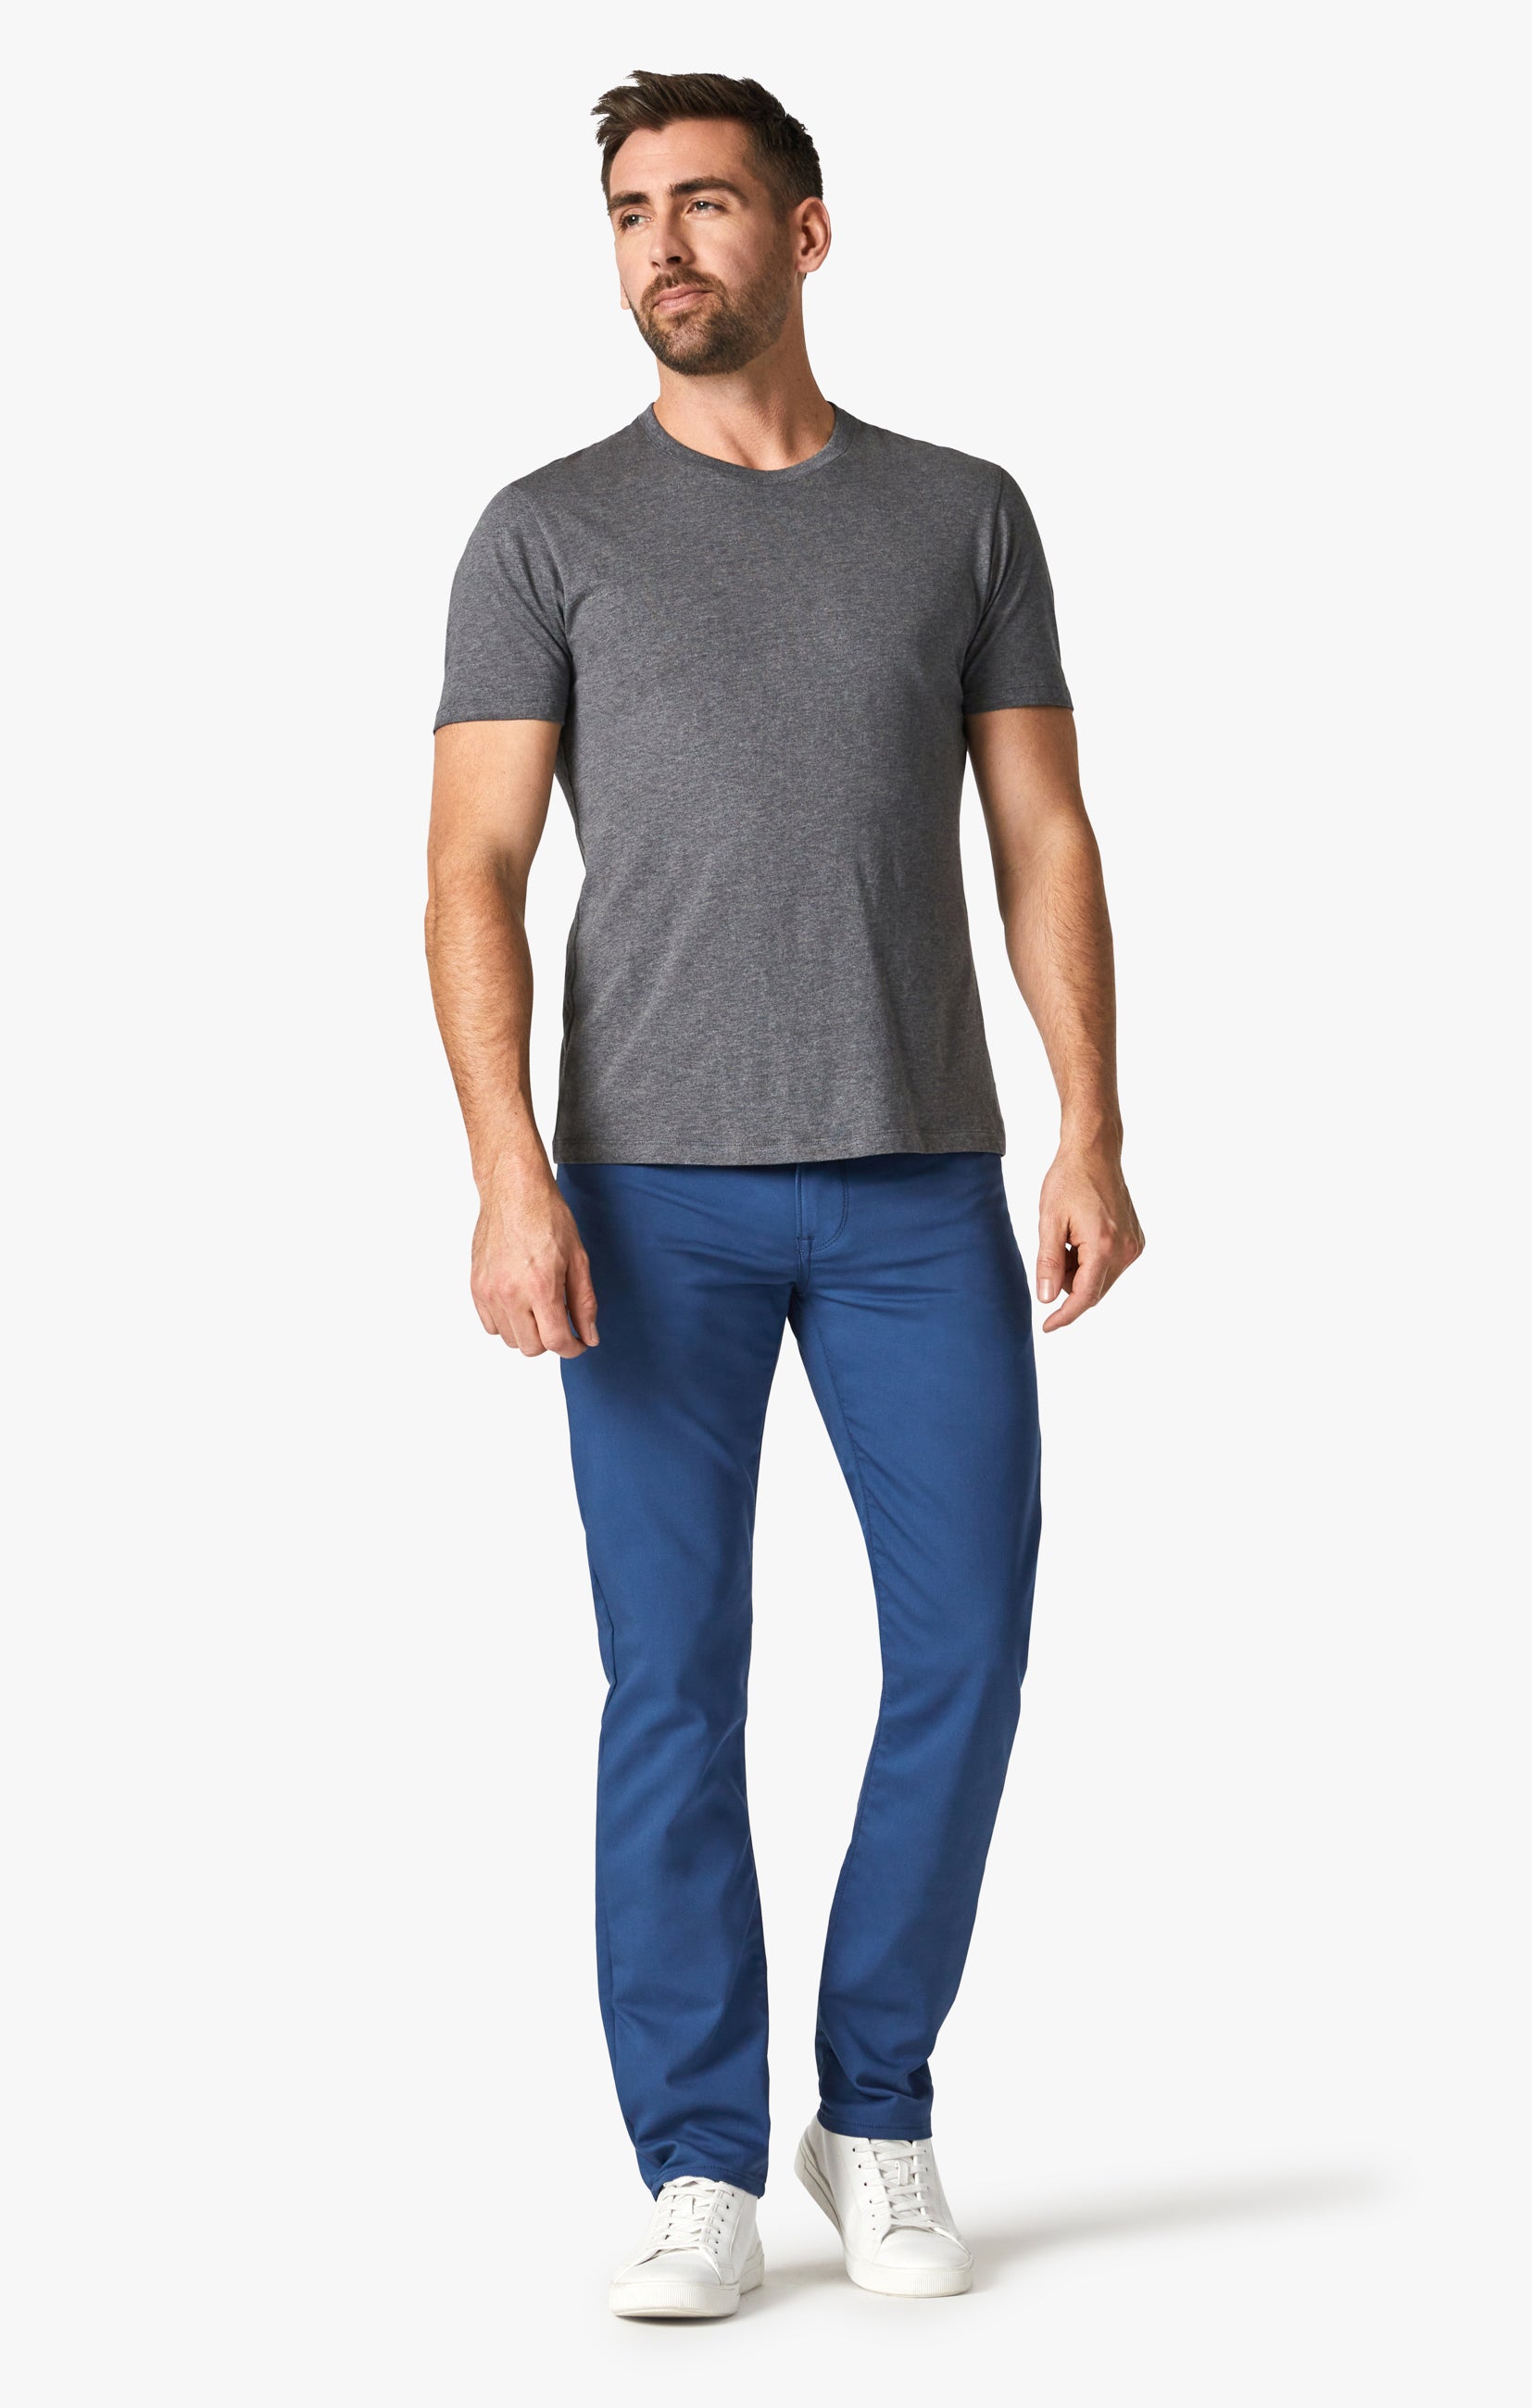 Courage Straight Leg Jeans in Cobalt Commuter Image 1